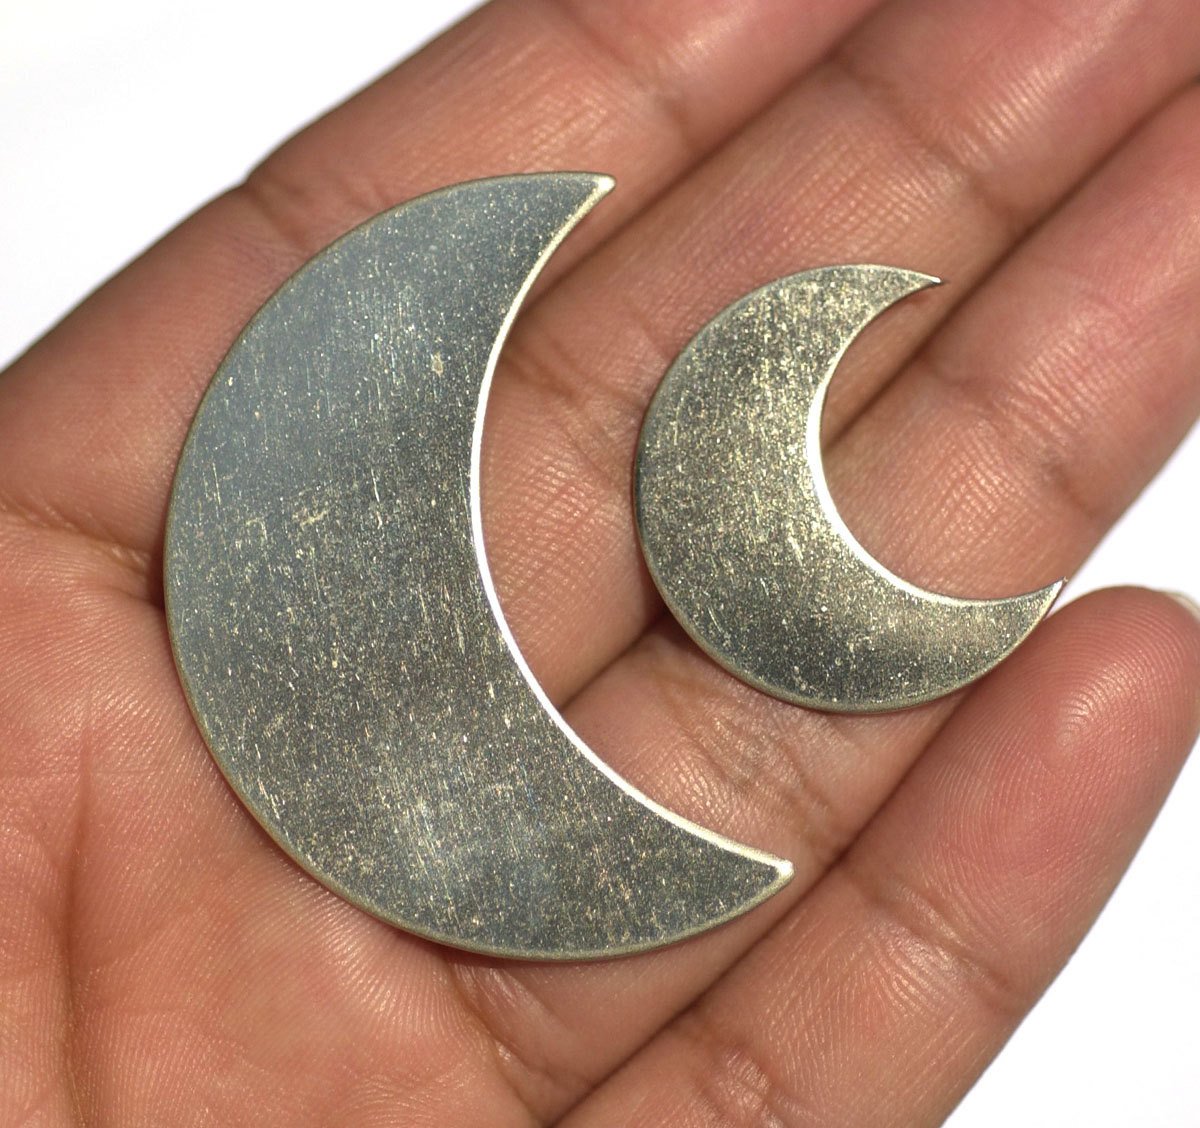 Nickel Silver Large Luna Moon 45mm x 30mm 22g Metal Blanks Form Shape Charms for Texturing Soldering Jewelry Making Blank - 2 pieces